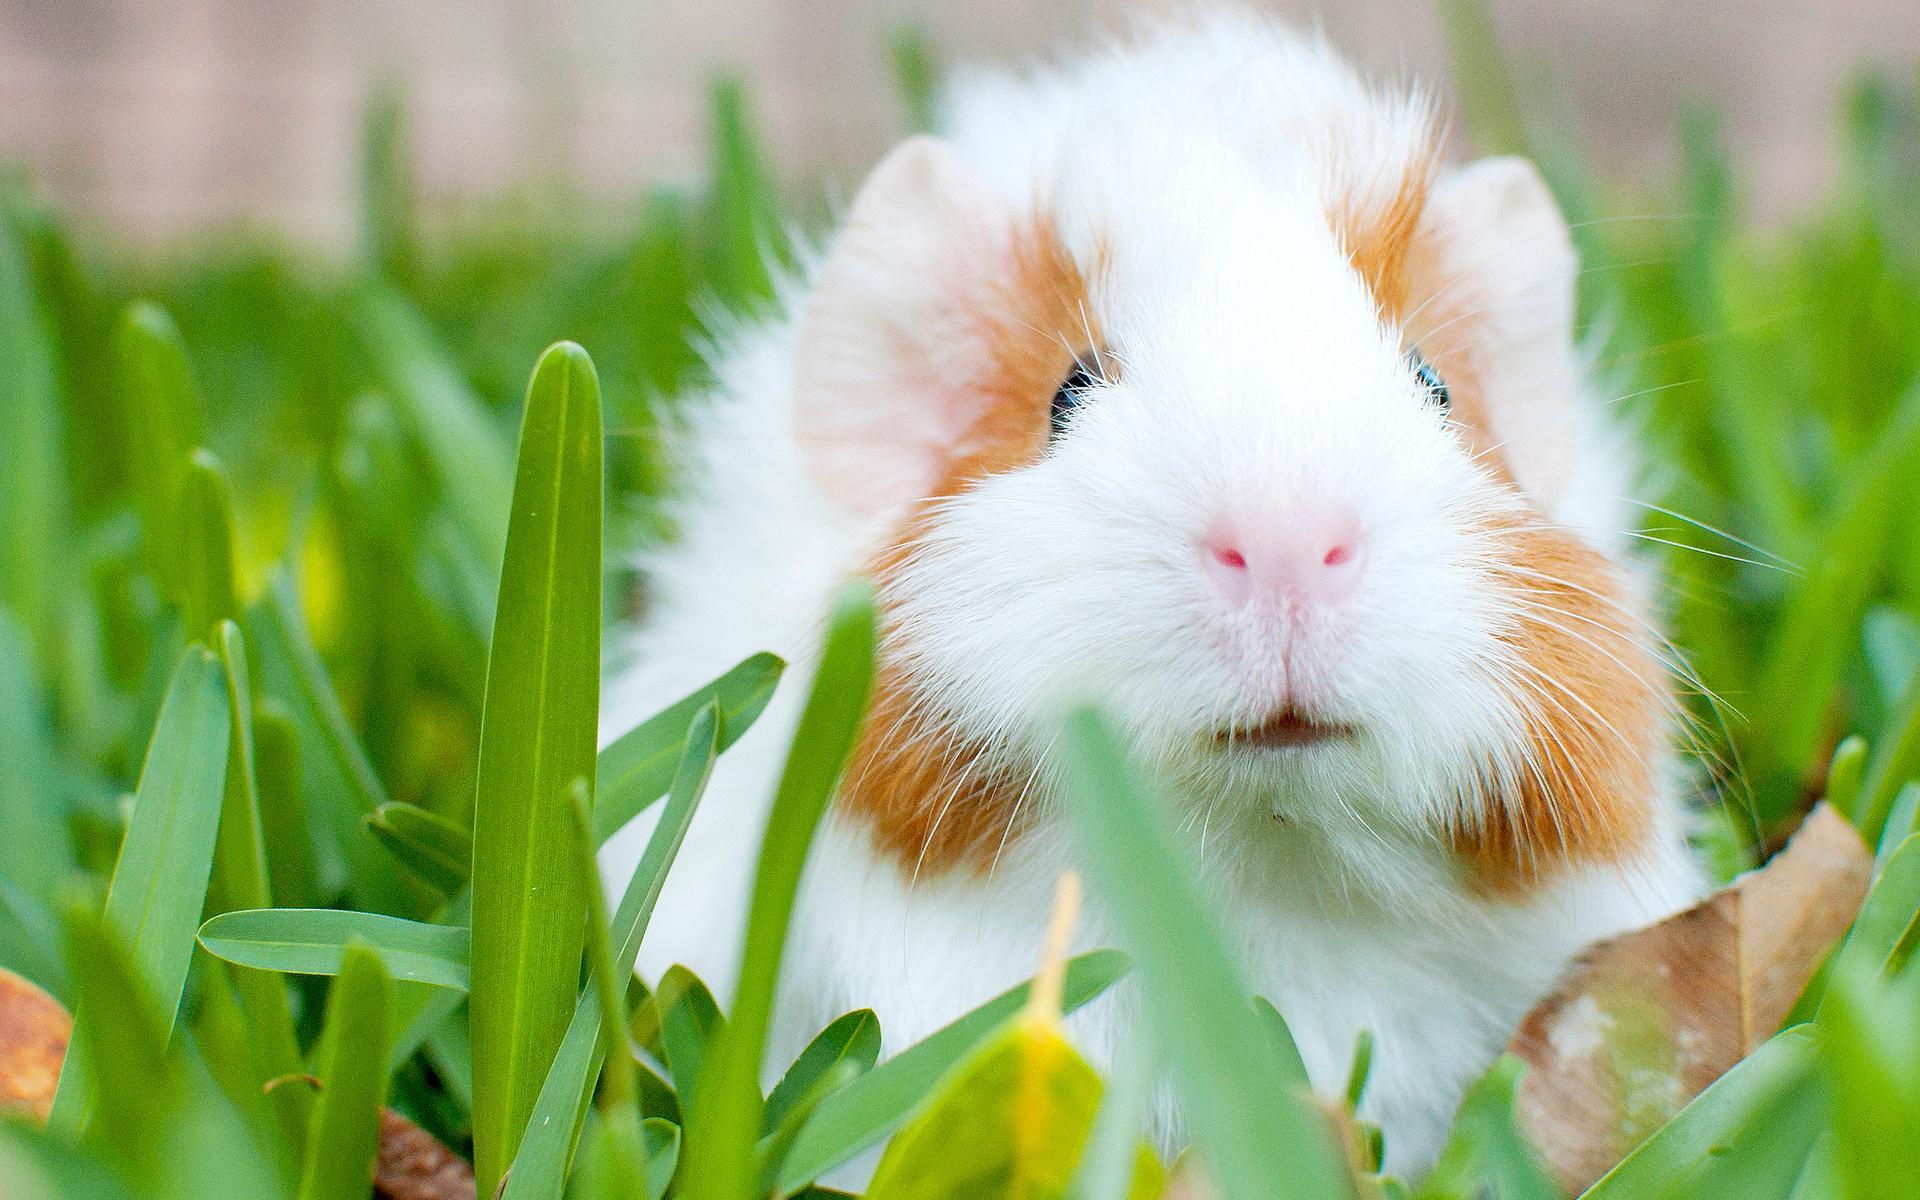 Cute Guinea Pig Wallpaper Group , Download for free